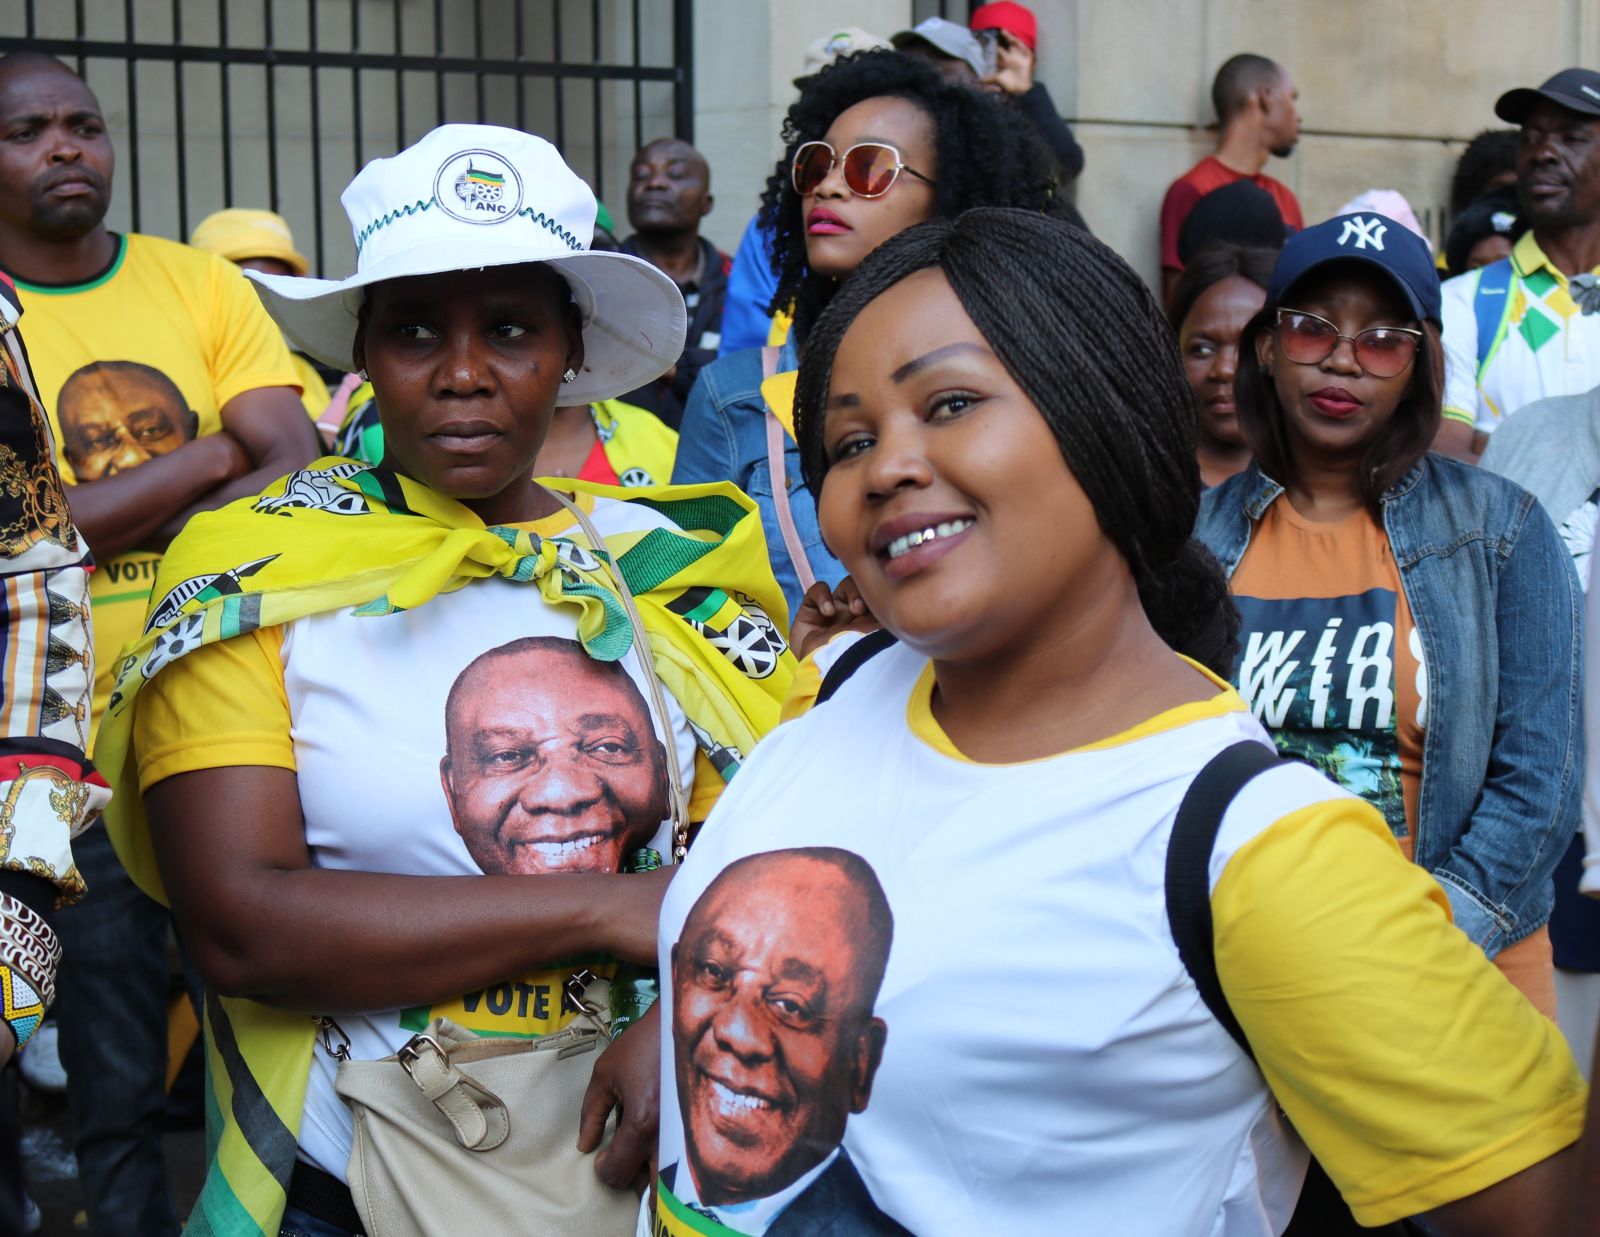 Supporters of President Cyril Ramaphosa and his ANC, governing party of South Africa.